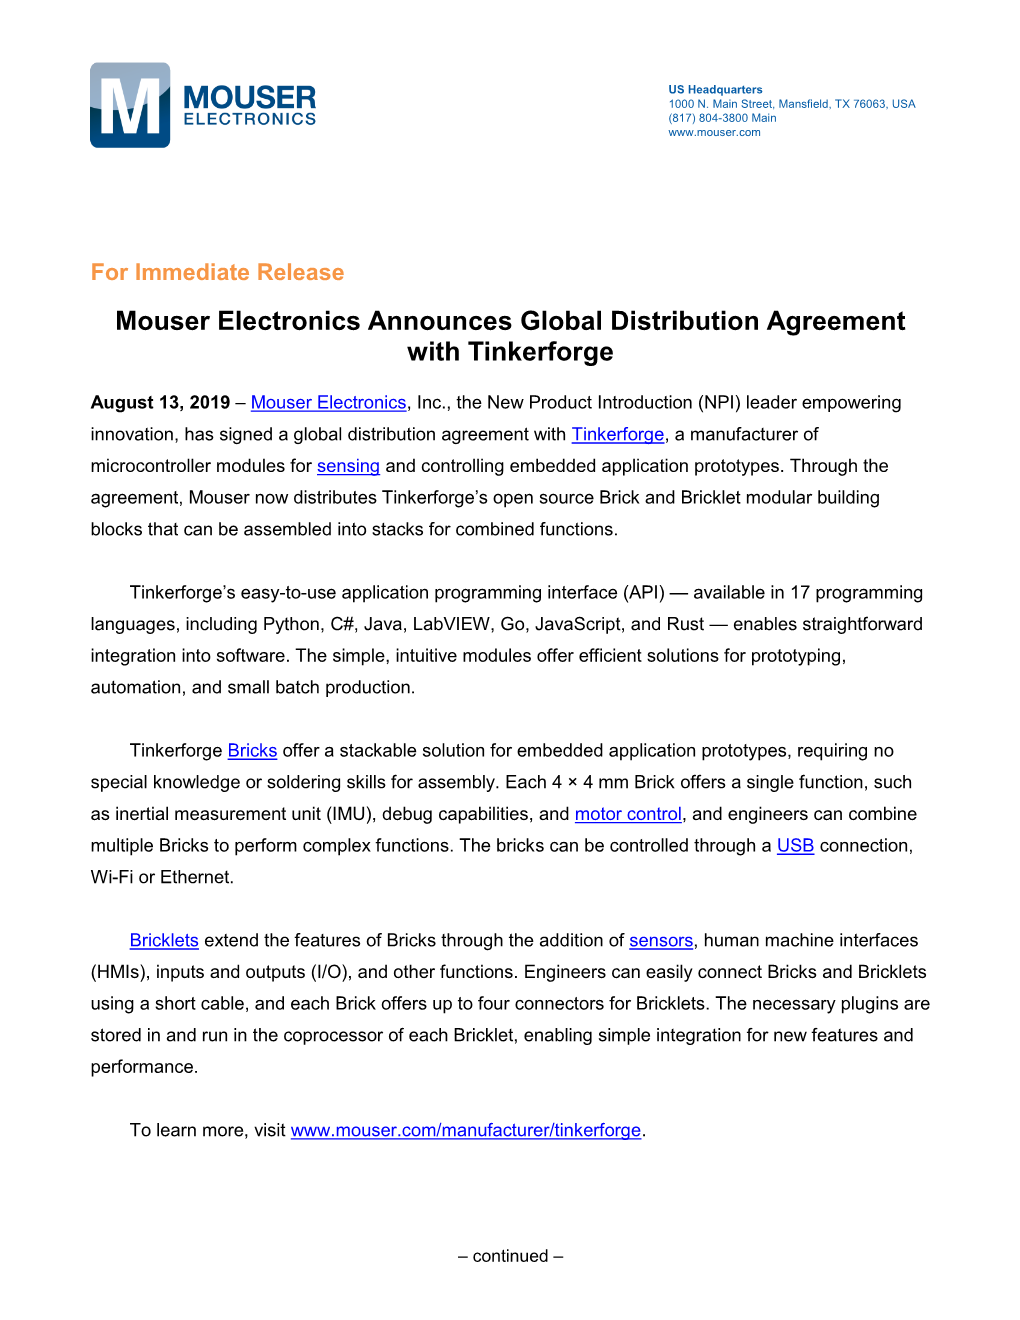 Mouser Electronics Announces Global Distribution Agreement with Tinkerforge